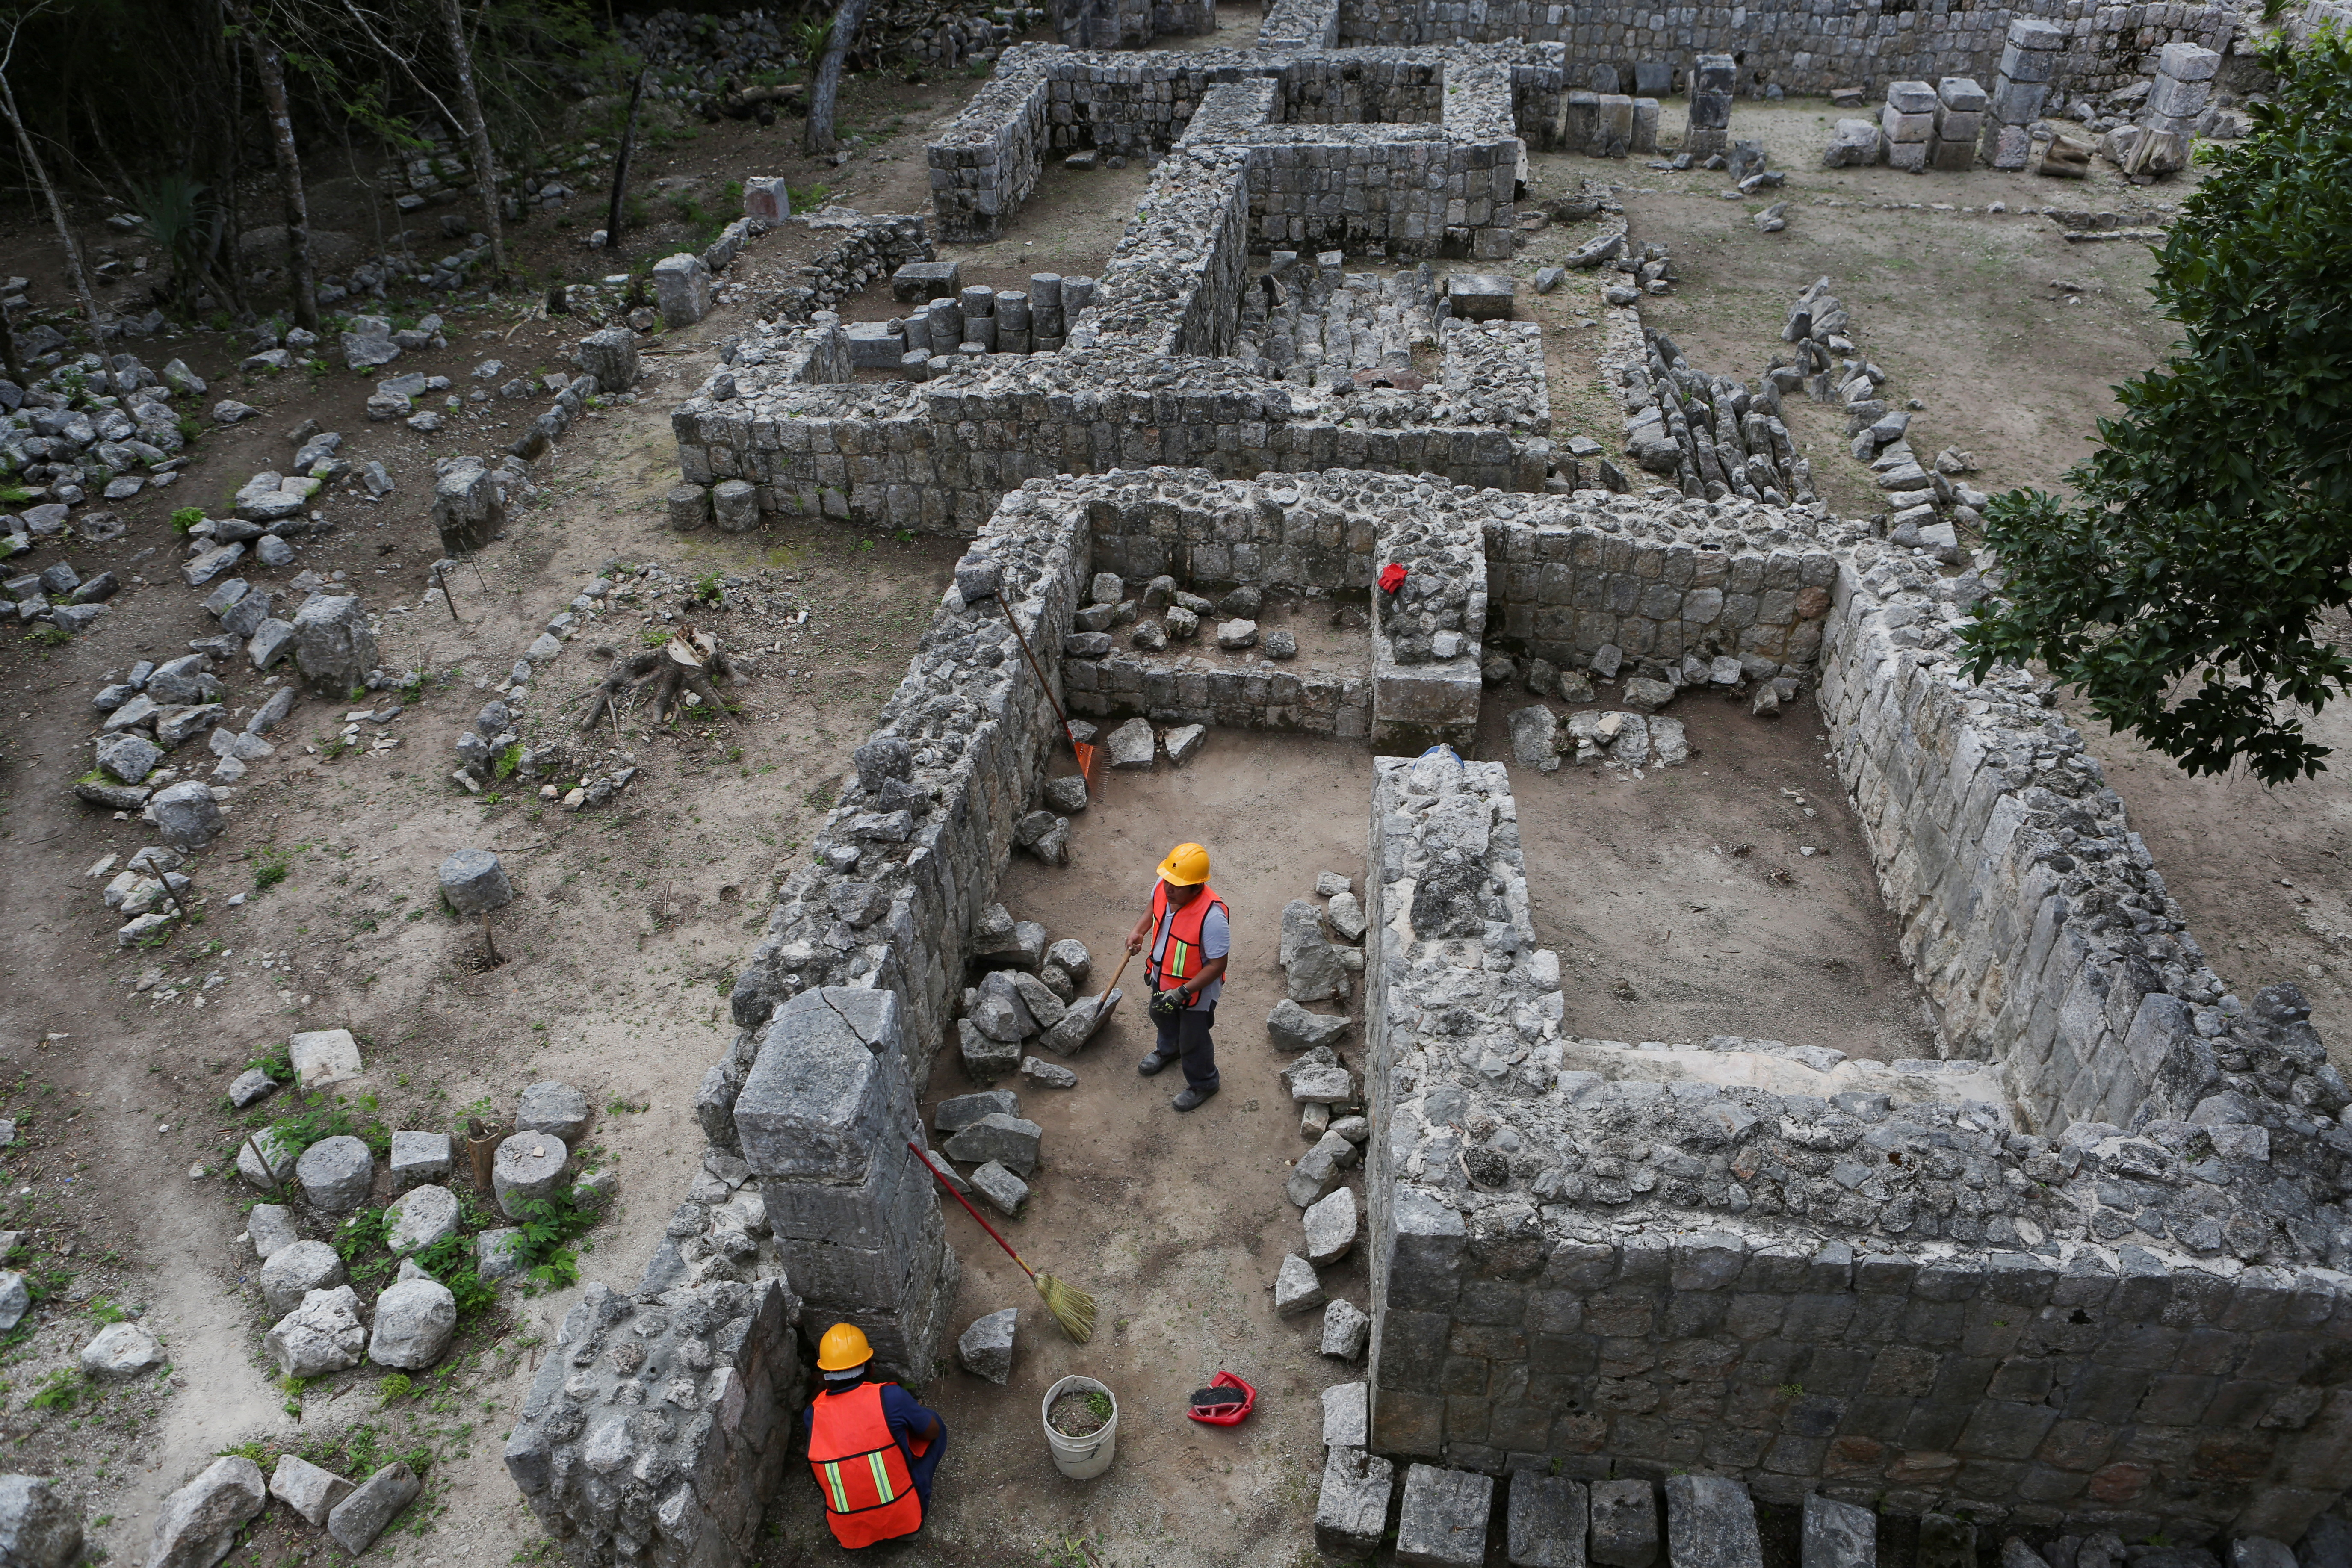 Media tour to Chichen Viejo at the archaeological site of Chichen Itza, in Piste